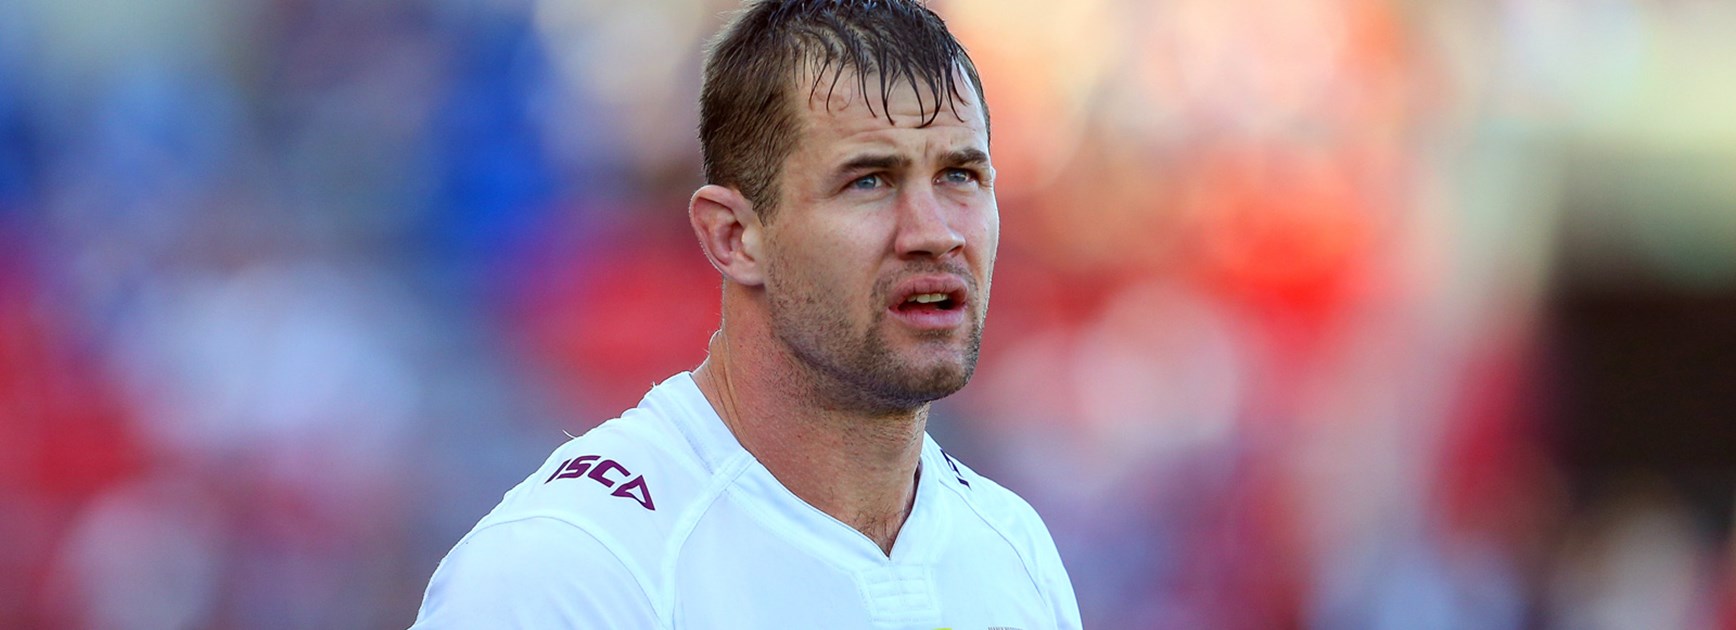 Sea Eagles prop Brenton Lawrence has been ruled out for the remainder of the season with a pec injury.